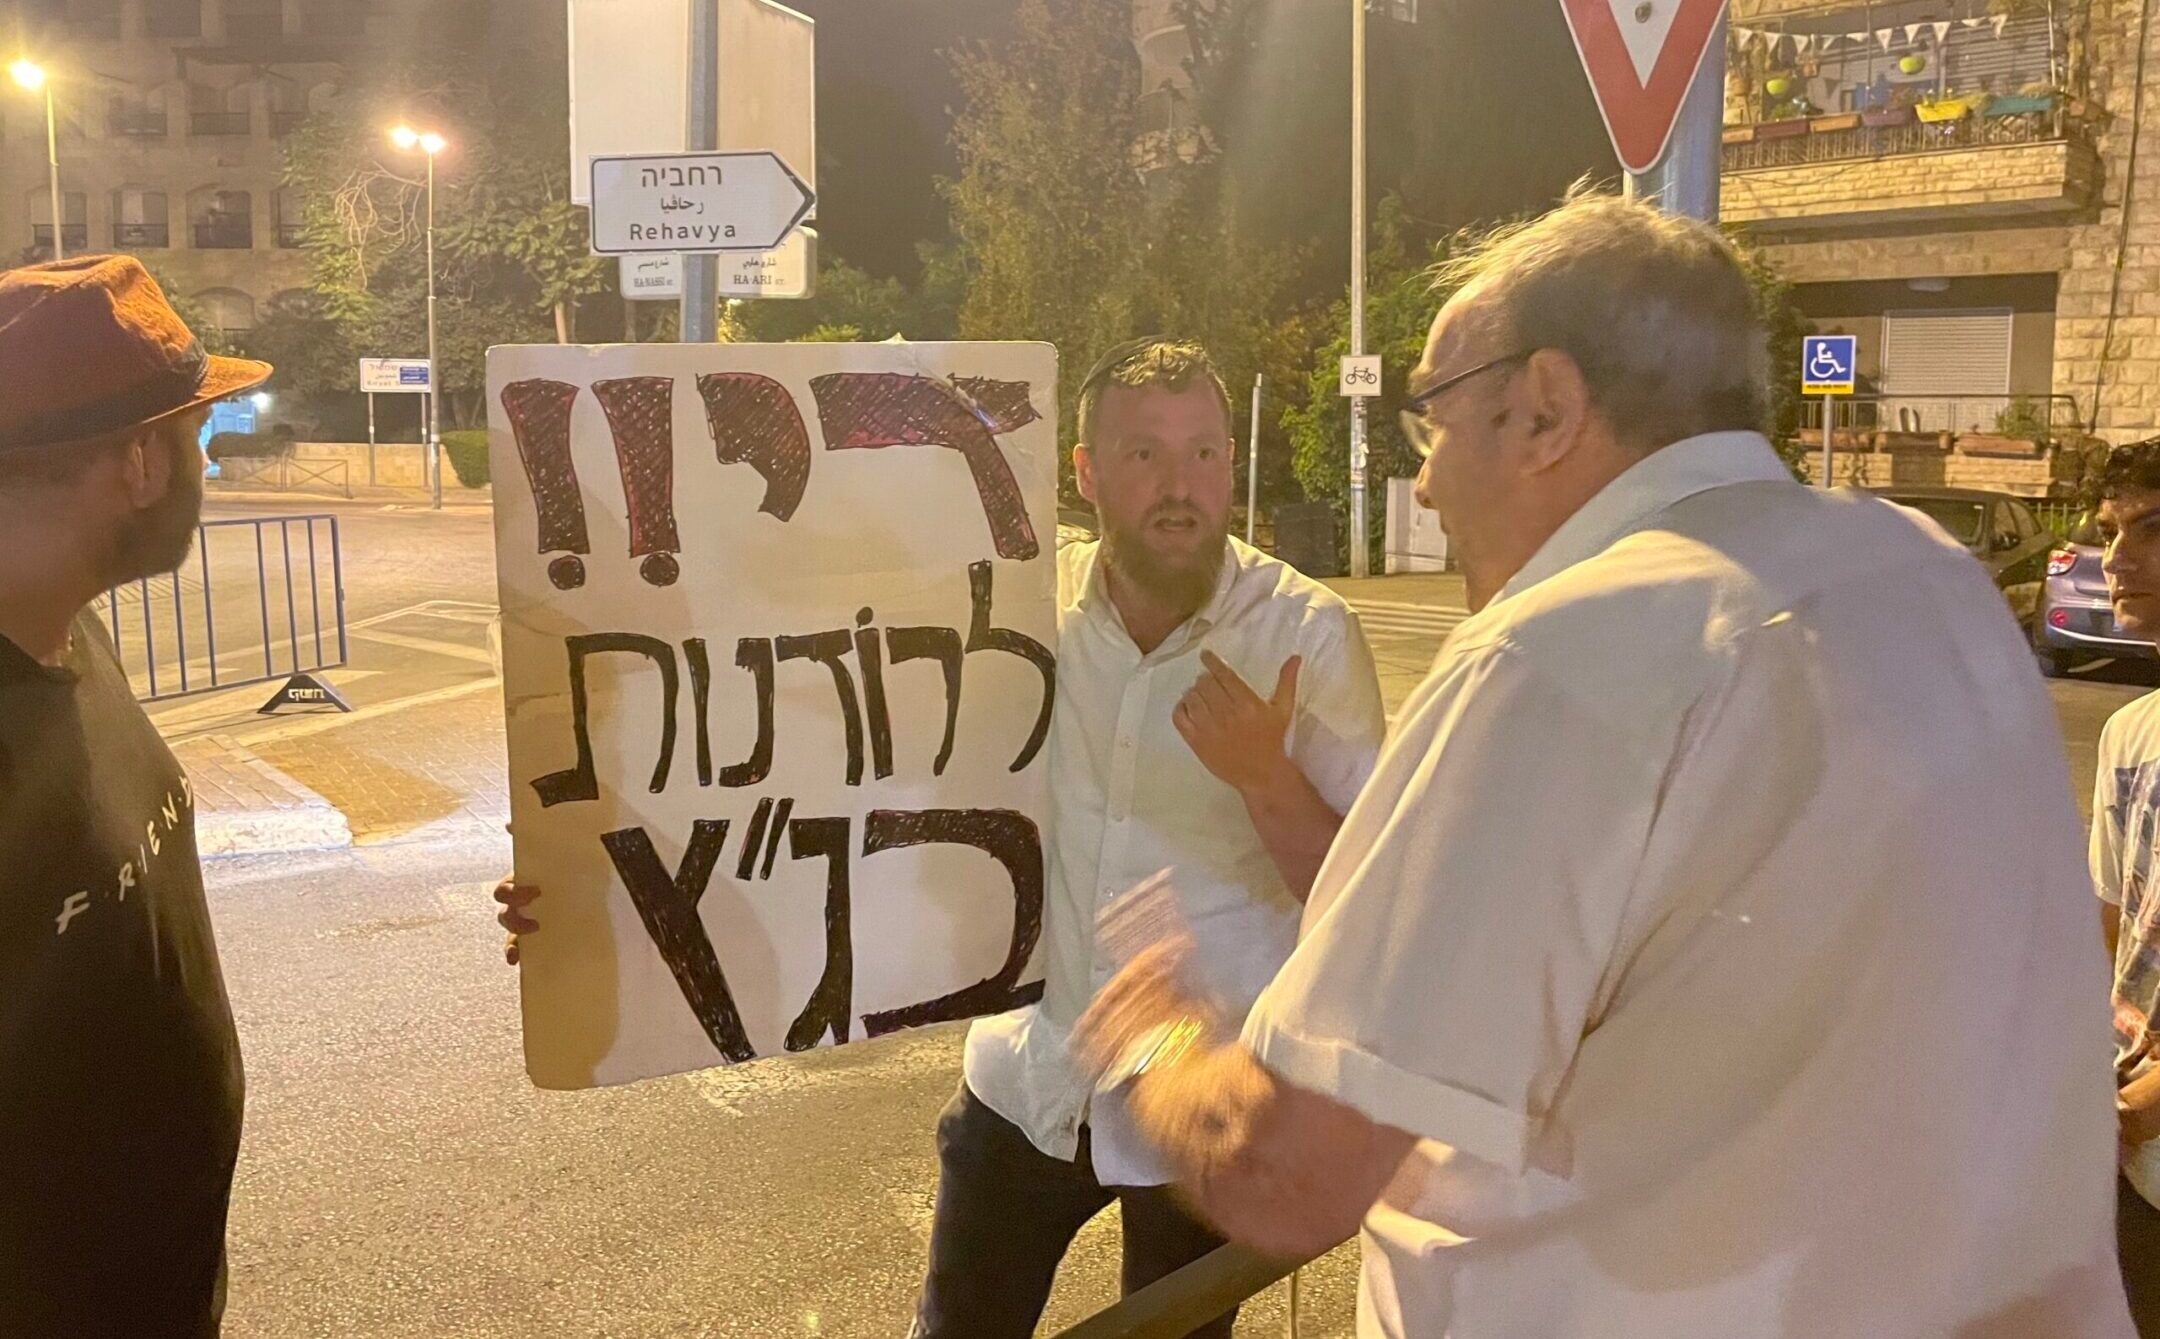 A supporter of proposed judicial reforms in Israel debates an opponent on the streets of Jerusalem, July 5, 2023. (Philissa Cramer)